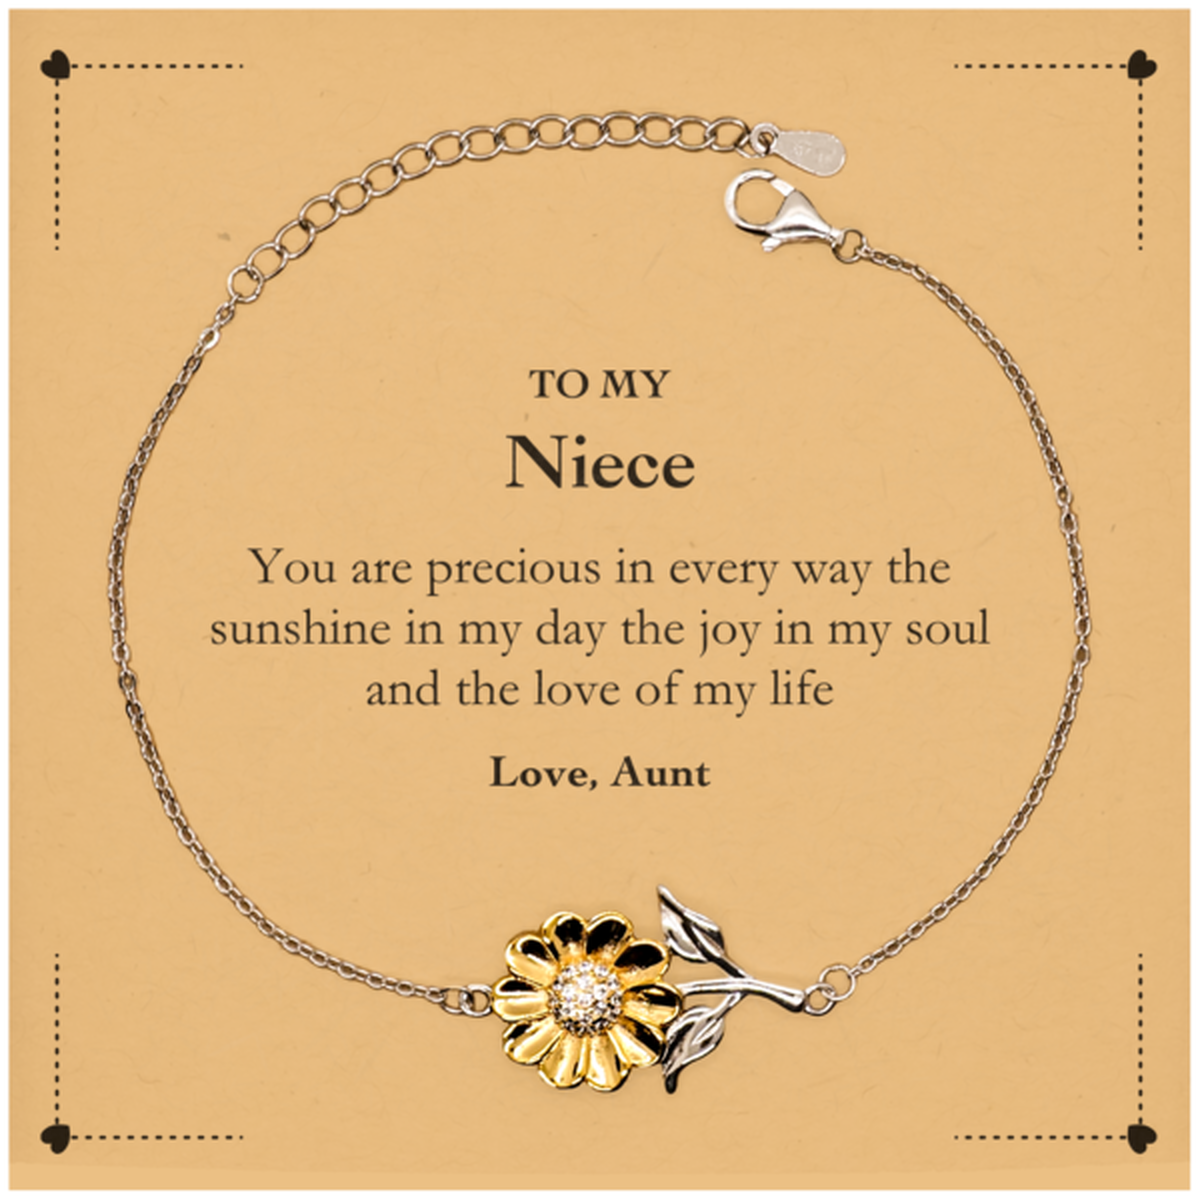 Graduation Gifts for Niece Sunflower Bracelet Present from Aunt, Christmas Niece Birthday Gifts Niece You are precious in every way the sunshine in my day. Love, Aunt